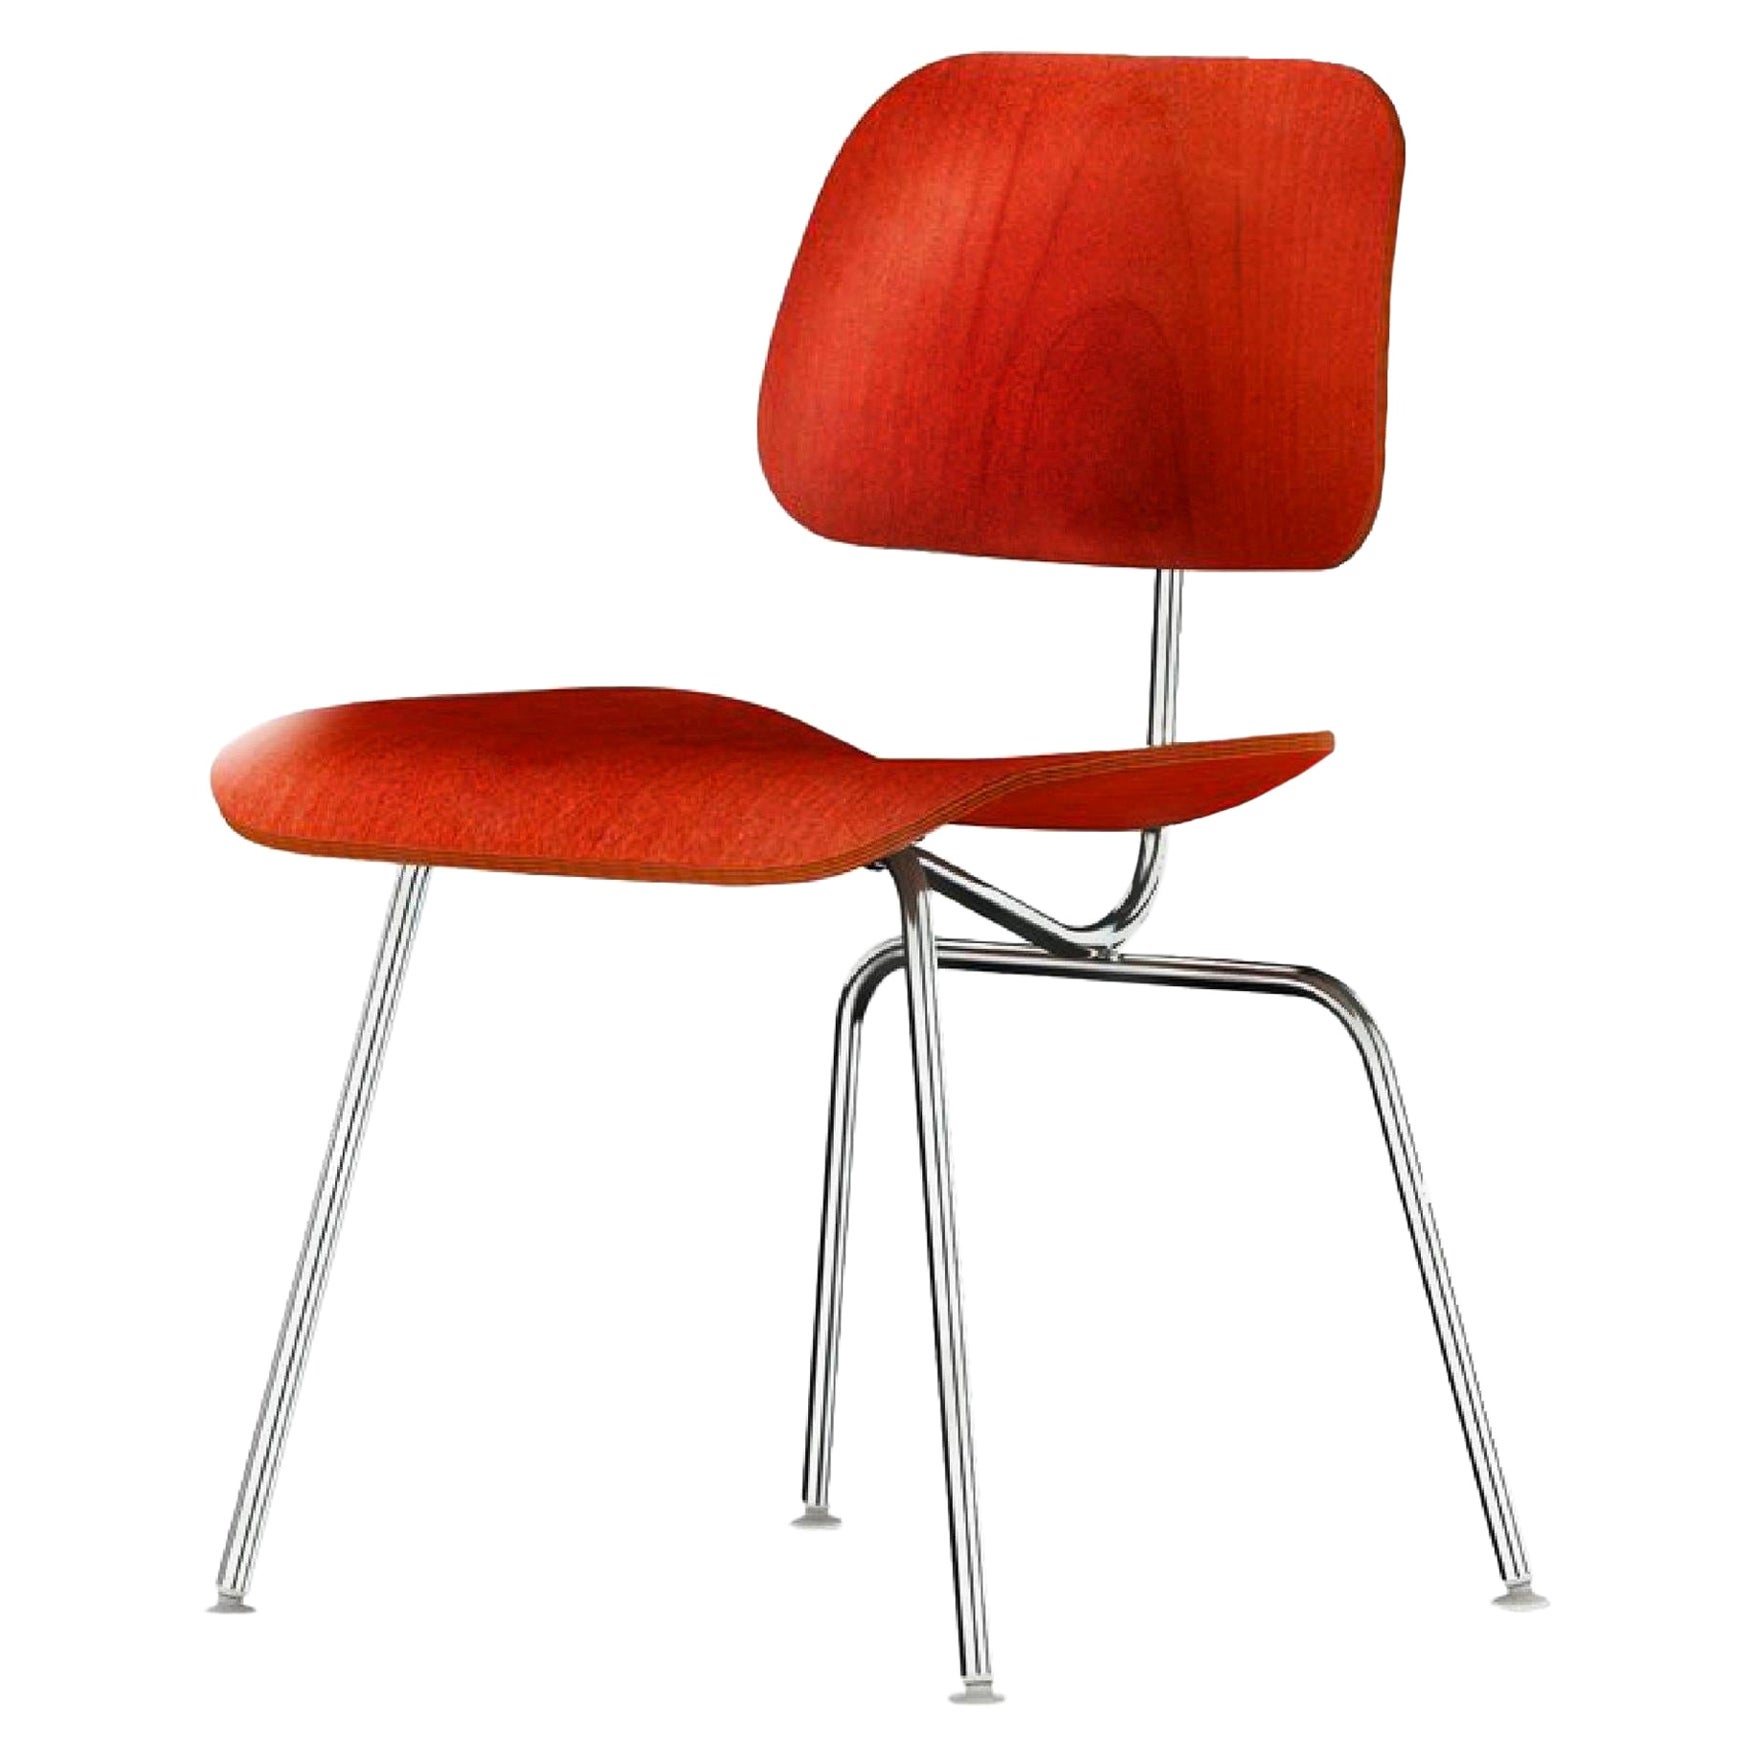 Charles and Ray Eames Red Beech DCM Chair, Herman Miller, Dining, Beistellstuhl